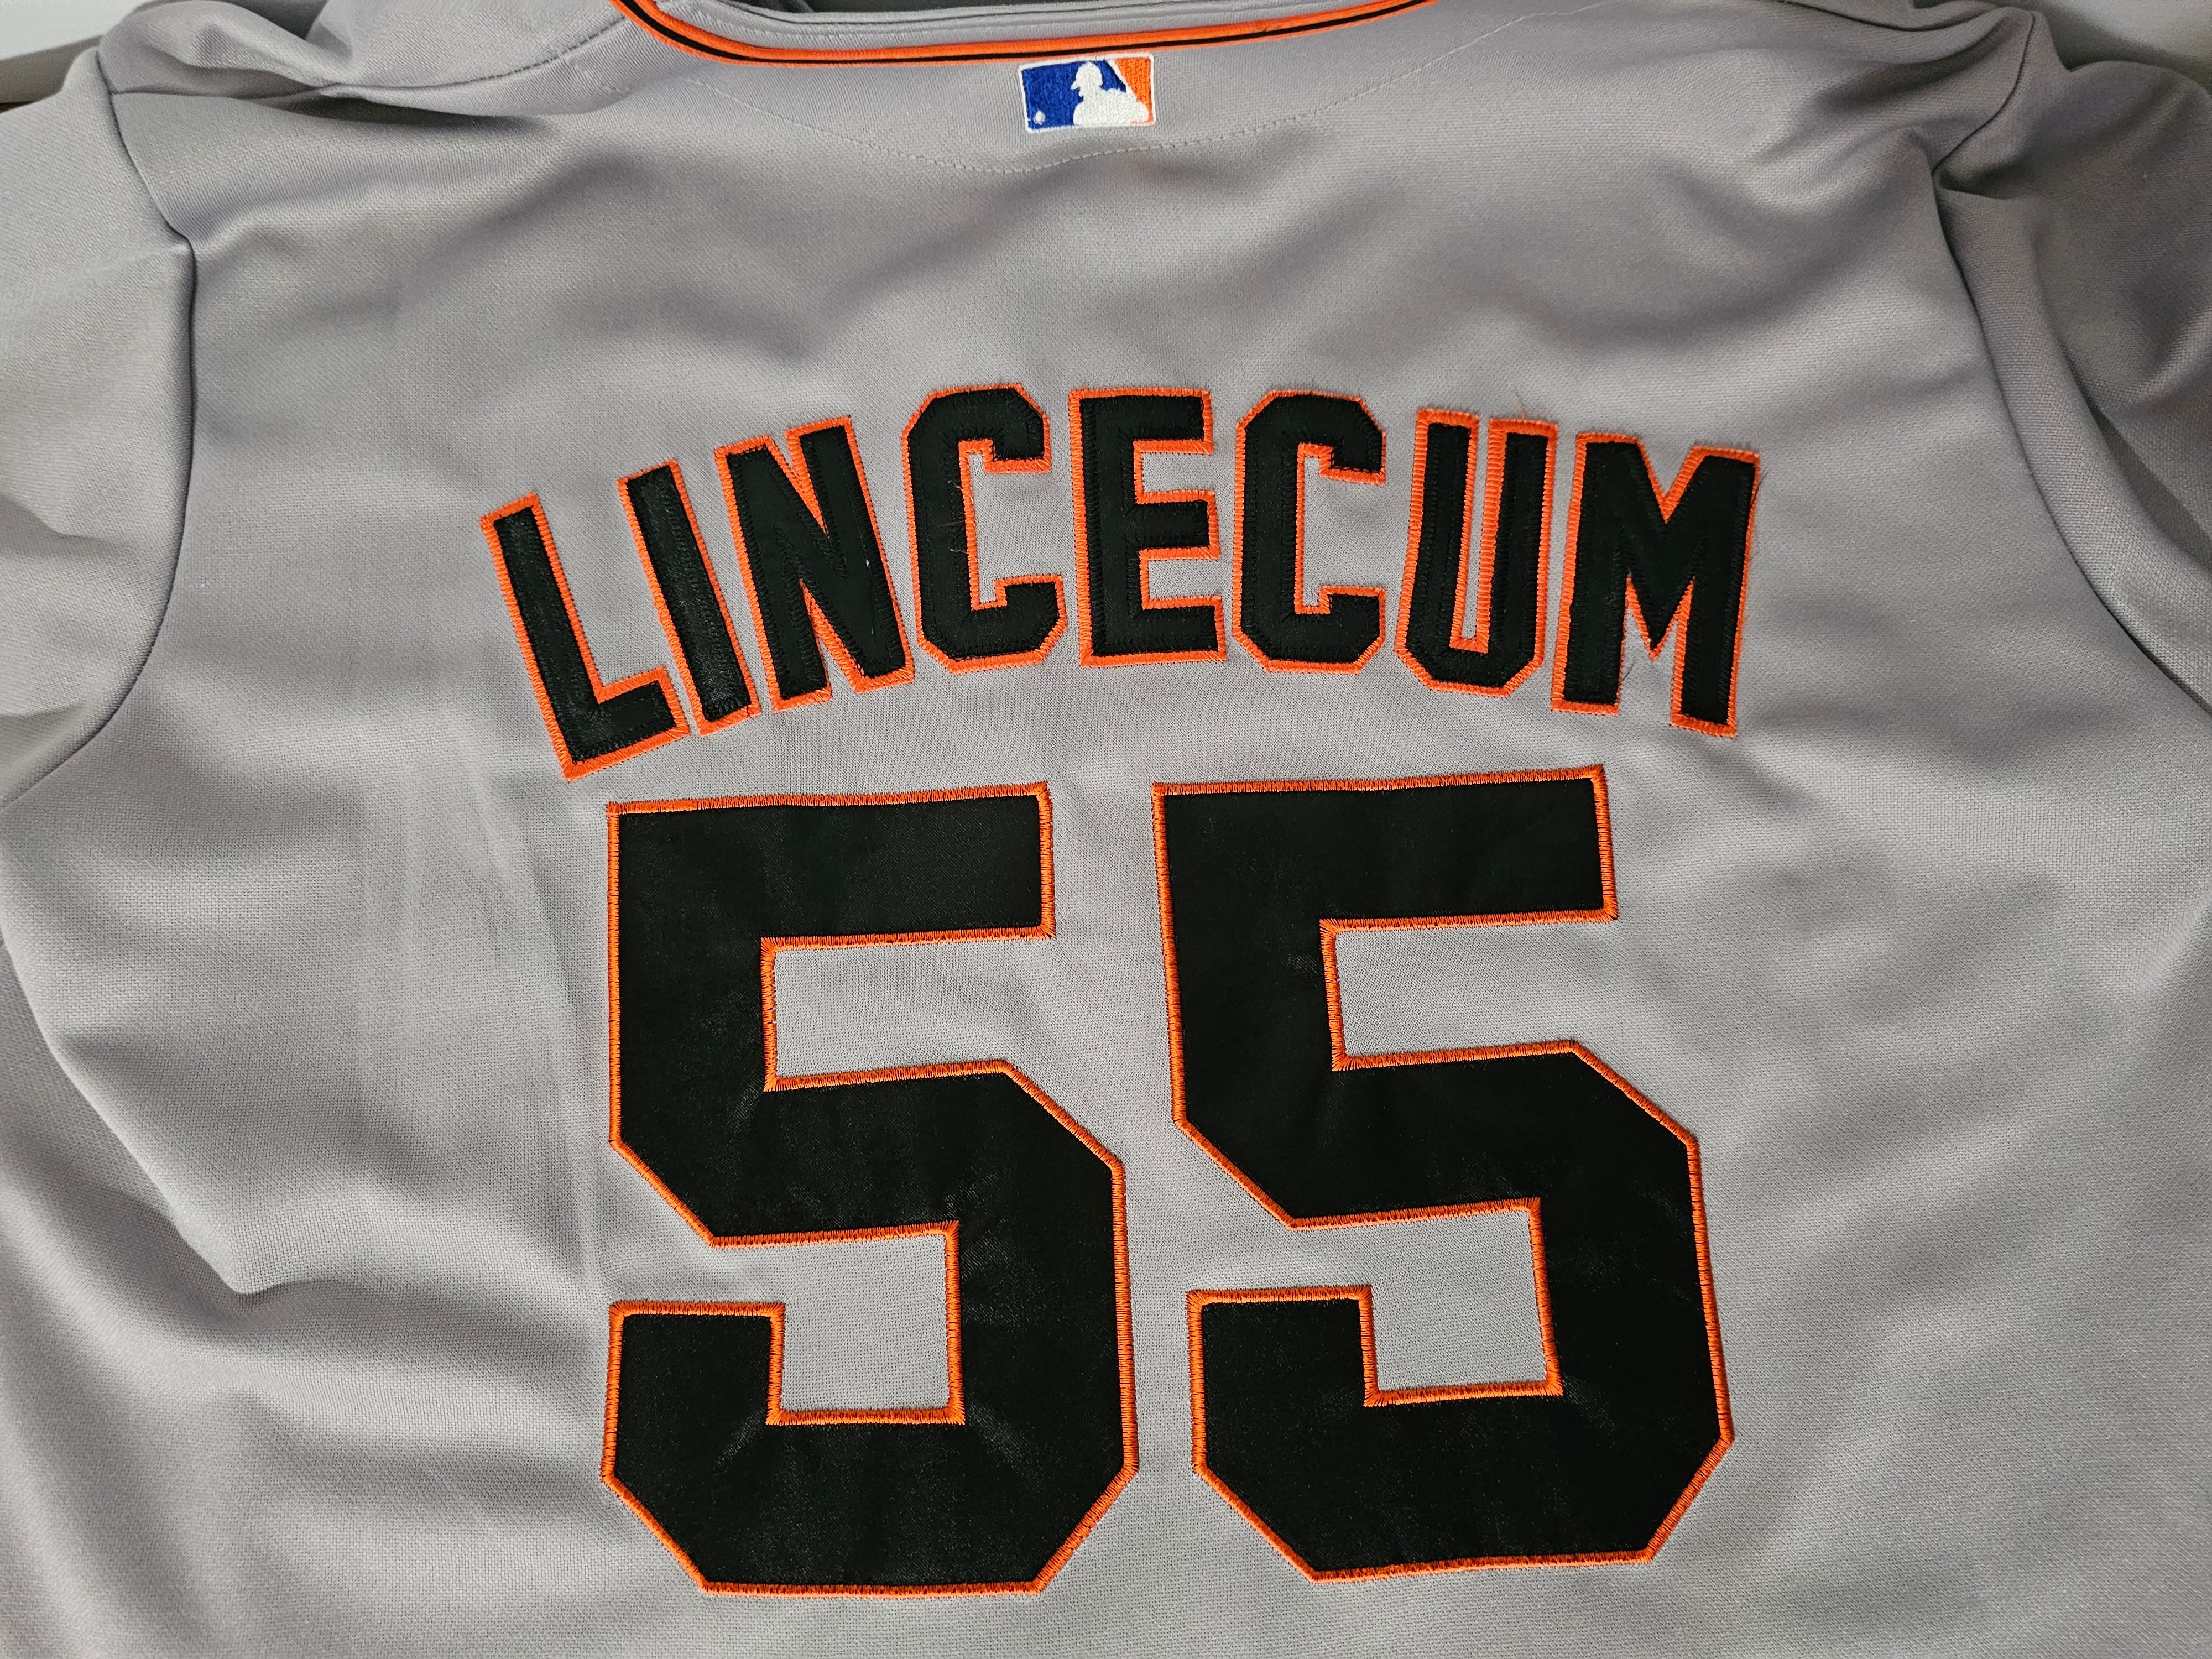 Tim Lincecum imposter scams jerseys from Ravens tight end